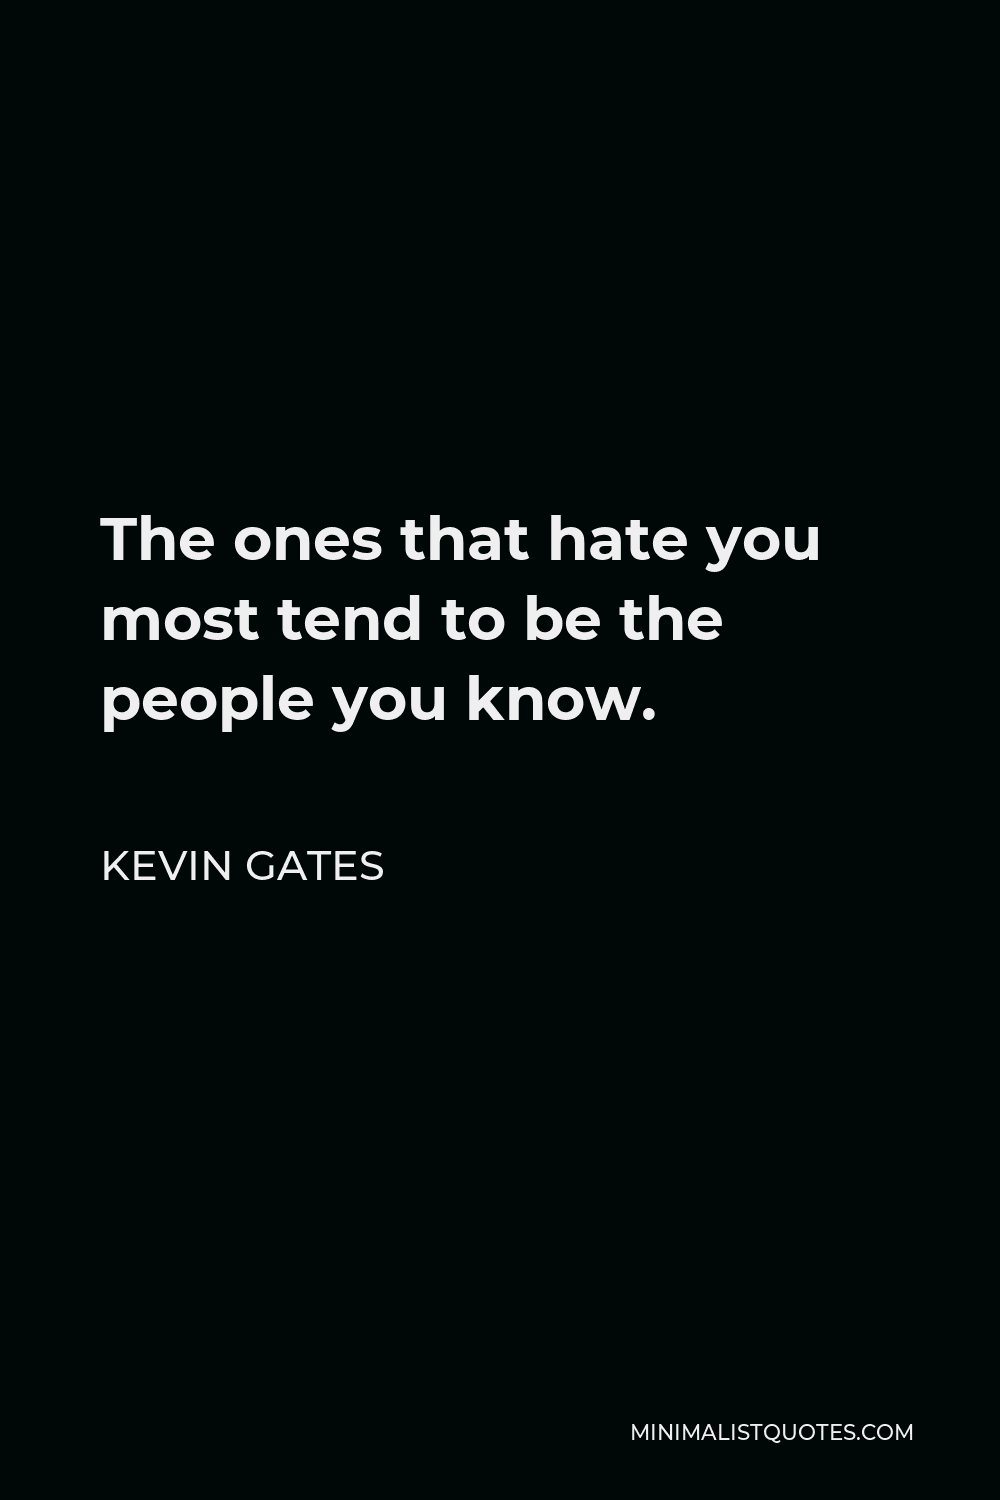 Kevin Gates Quote: The ones that hate you most tend to be the people